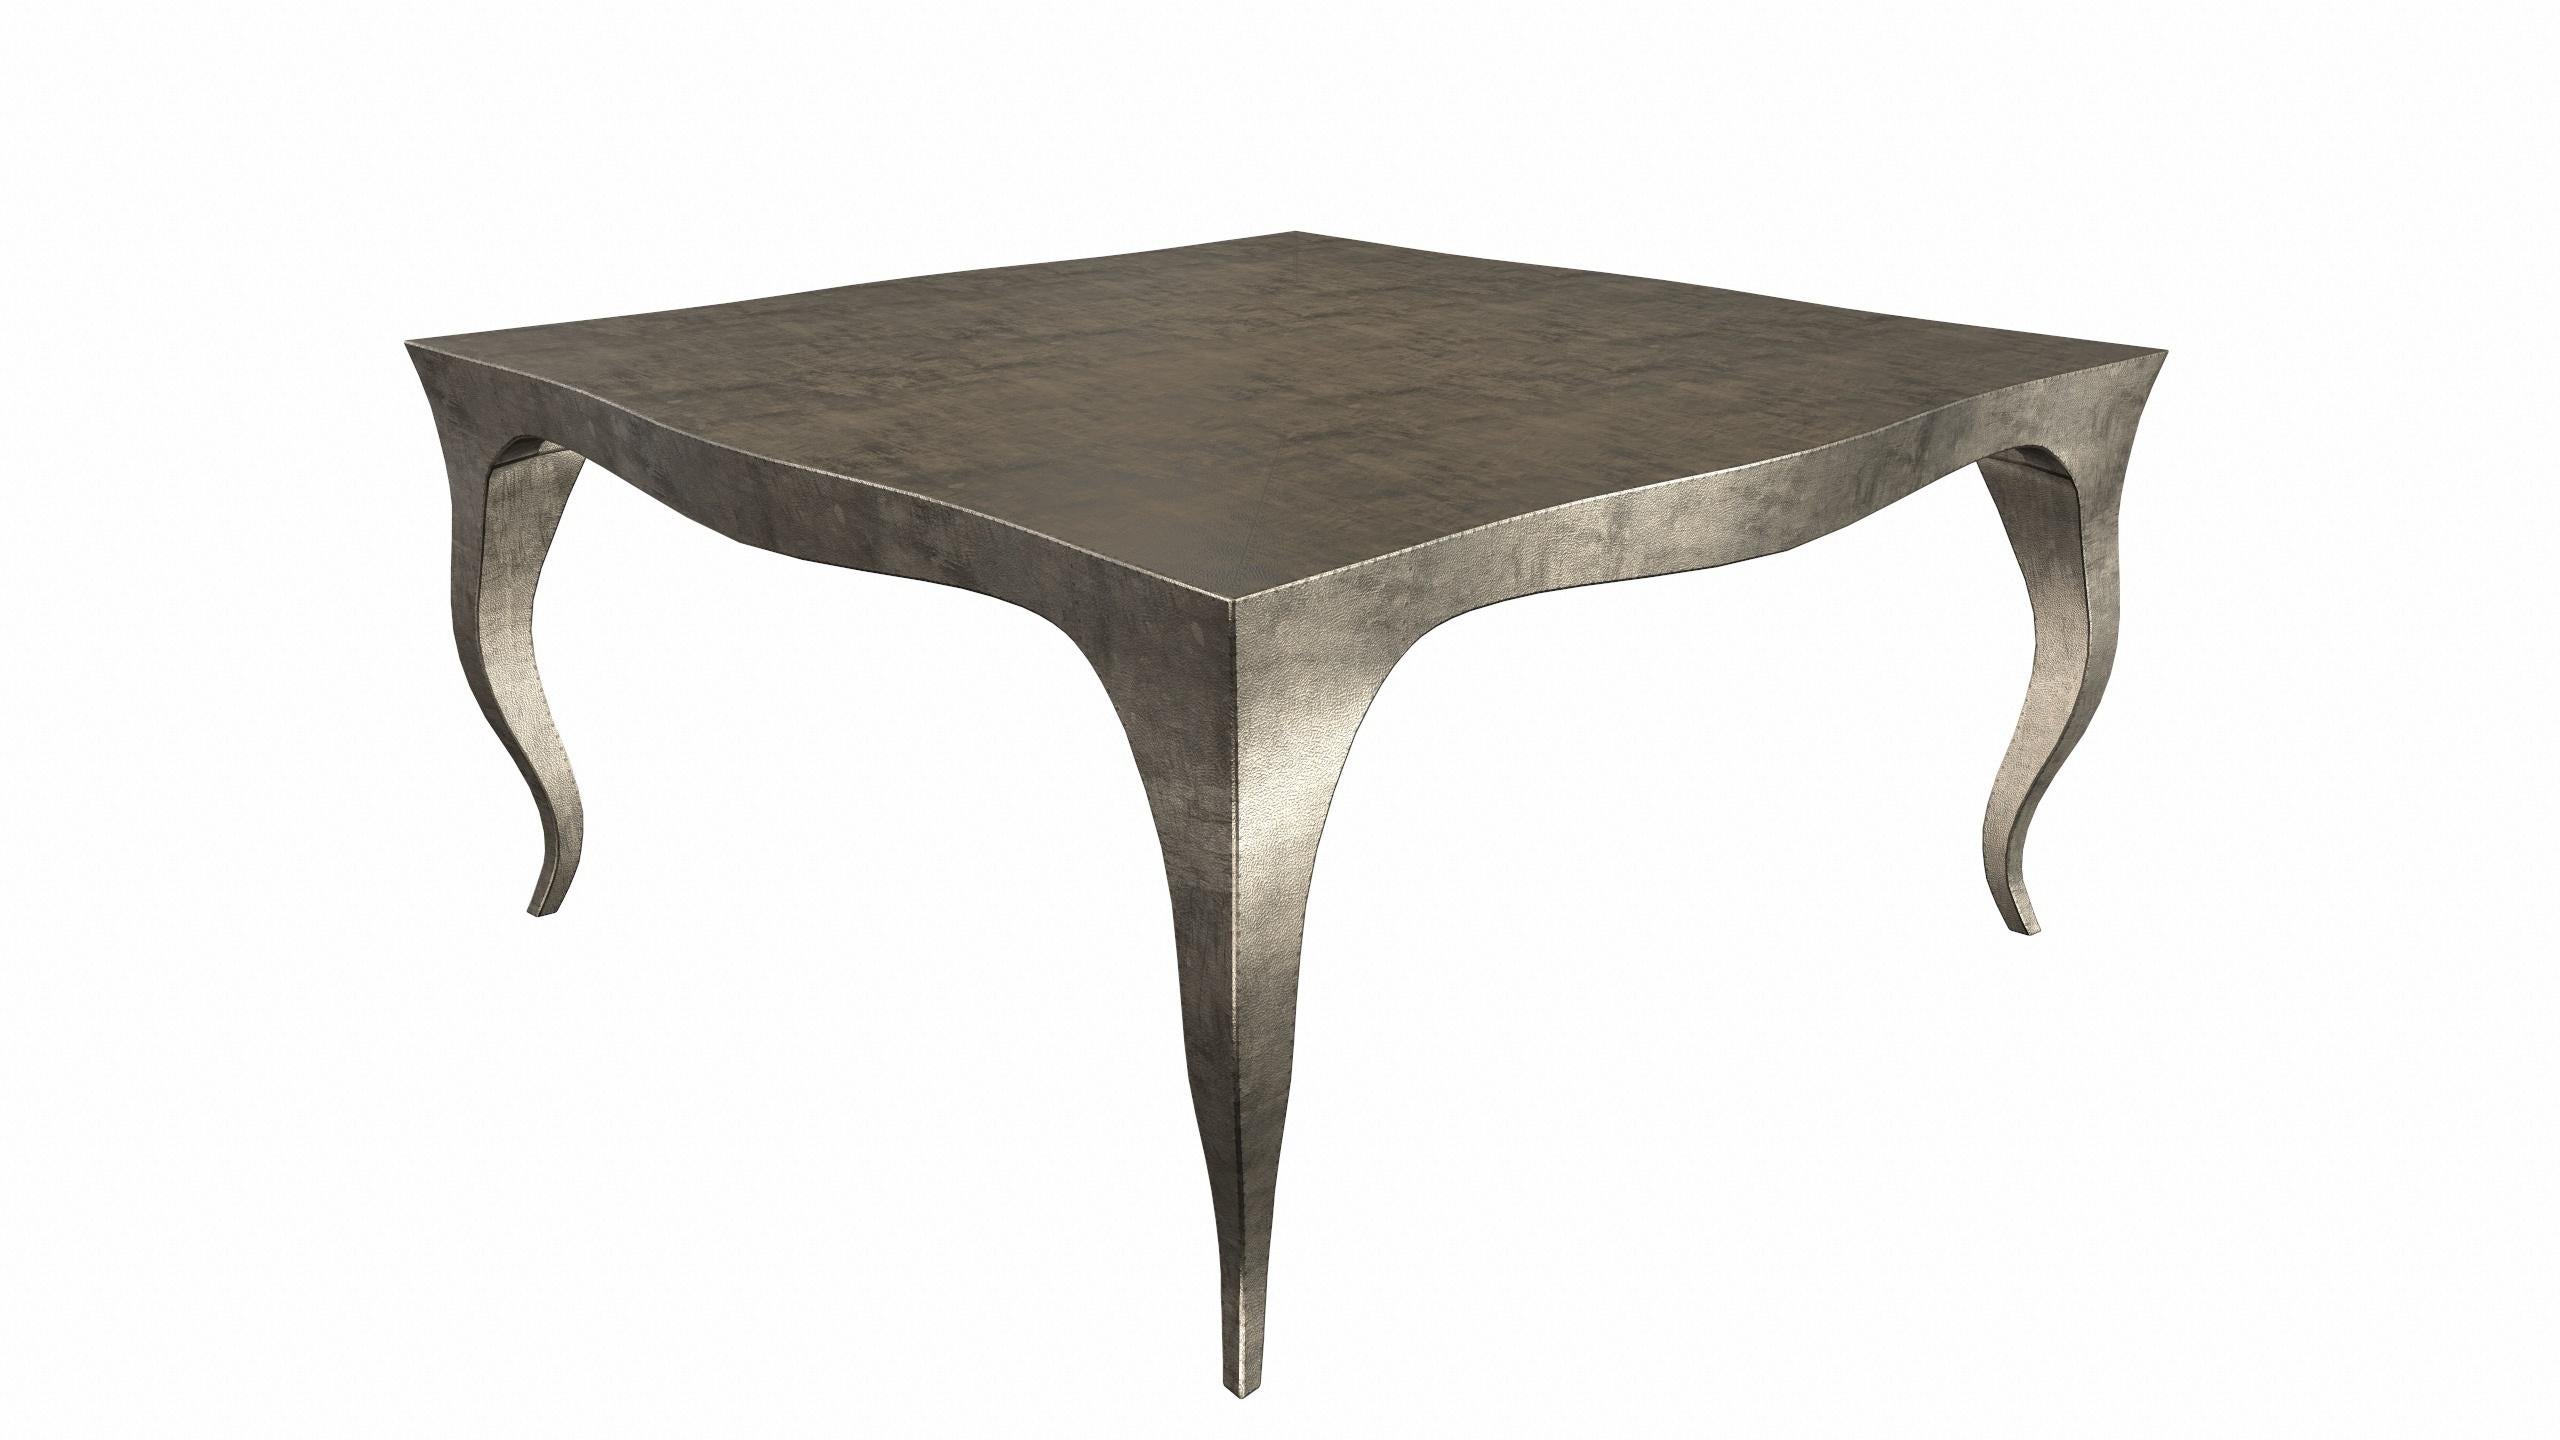 American Louise Art Deco Coffee Tables Fine Hammered Antique Bronze 18.5x18.5x10 inch For Sale